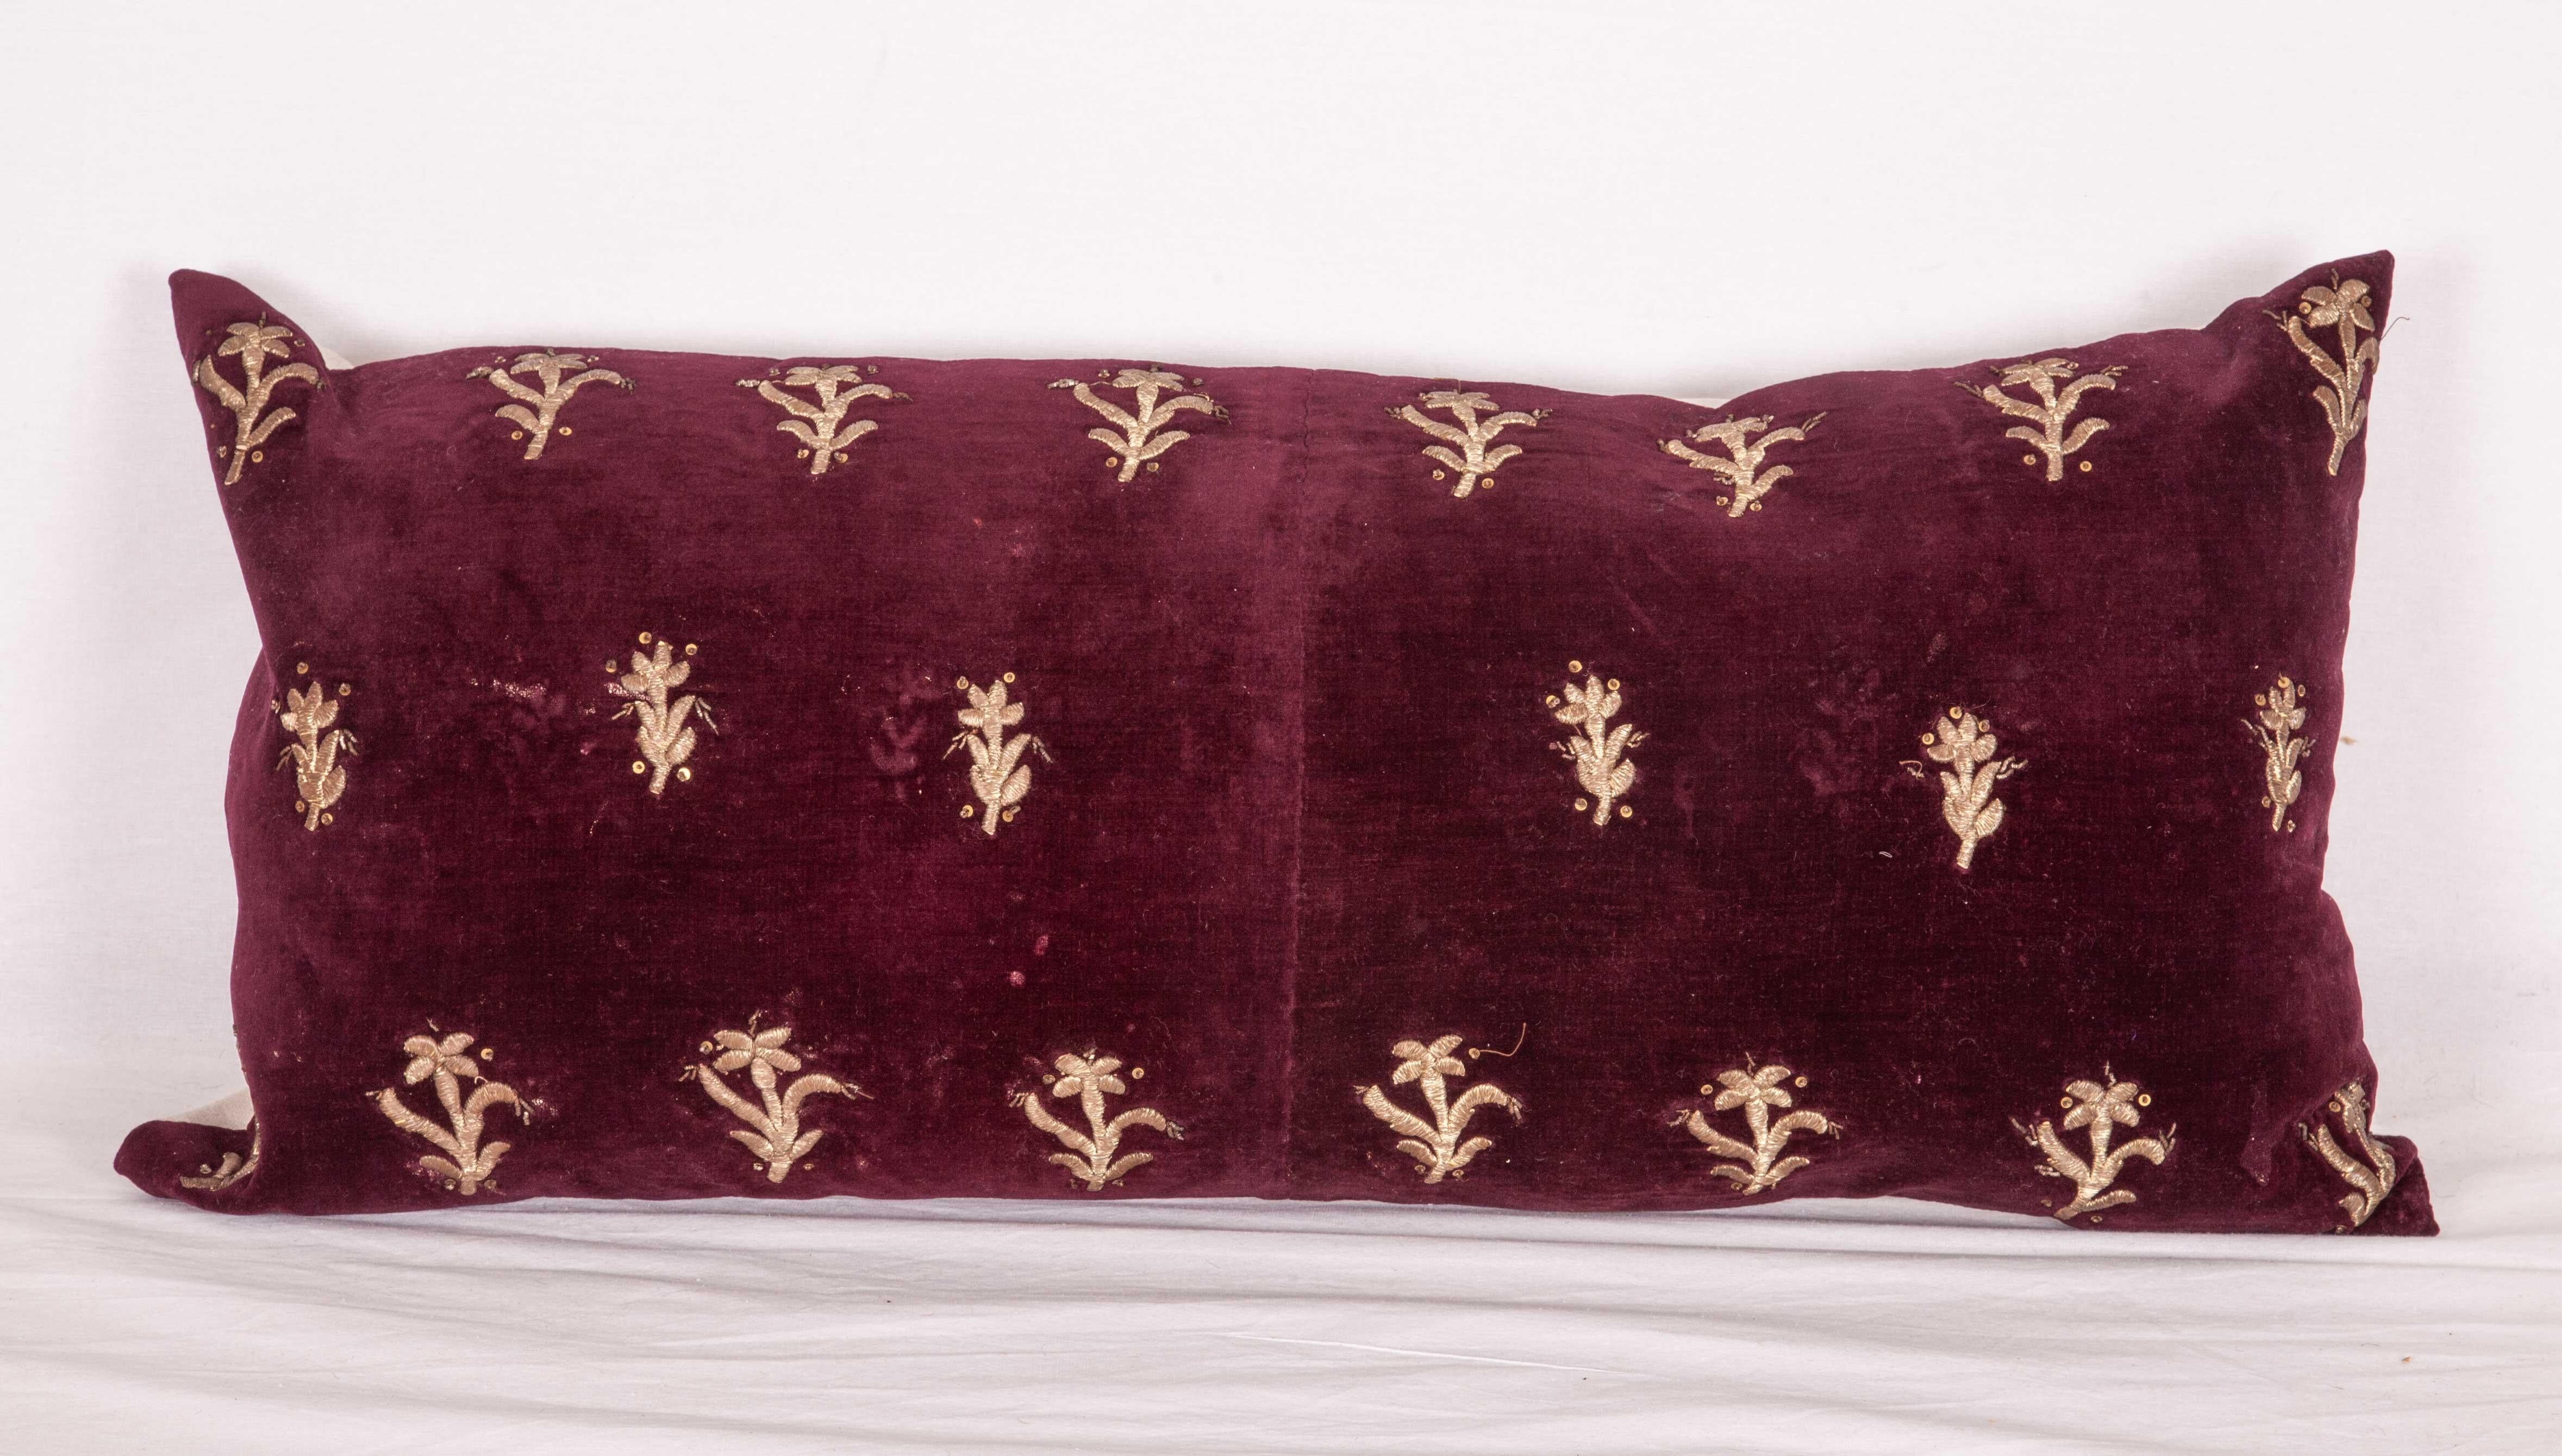 Embroidered Ottoman Turkish Velvet Pillow Cases, Early 20th Century For Sale